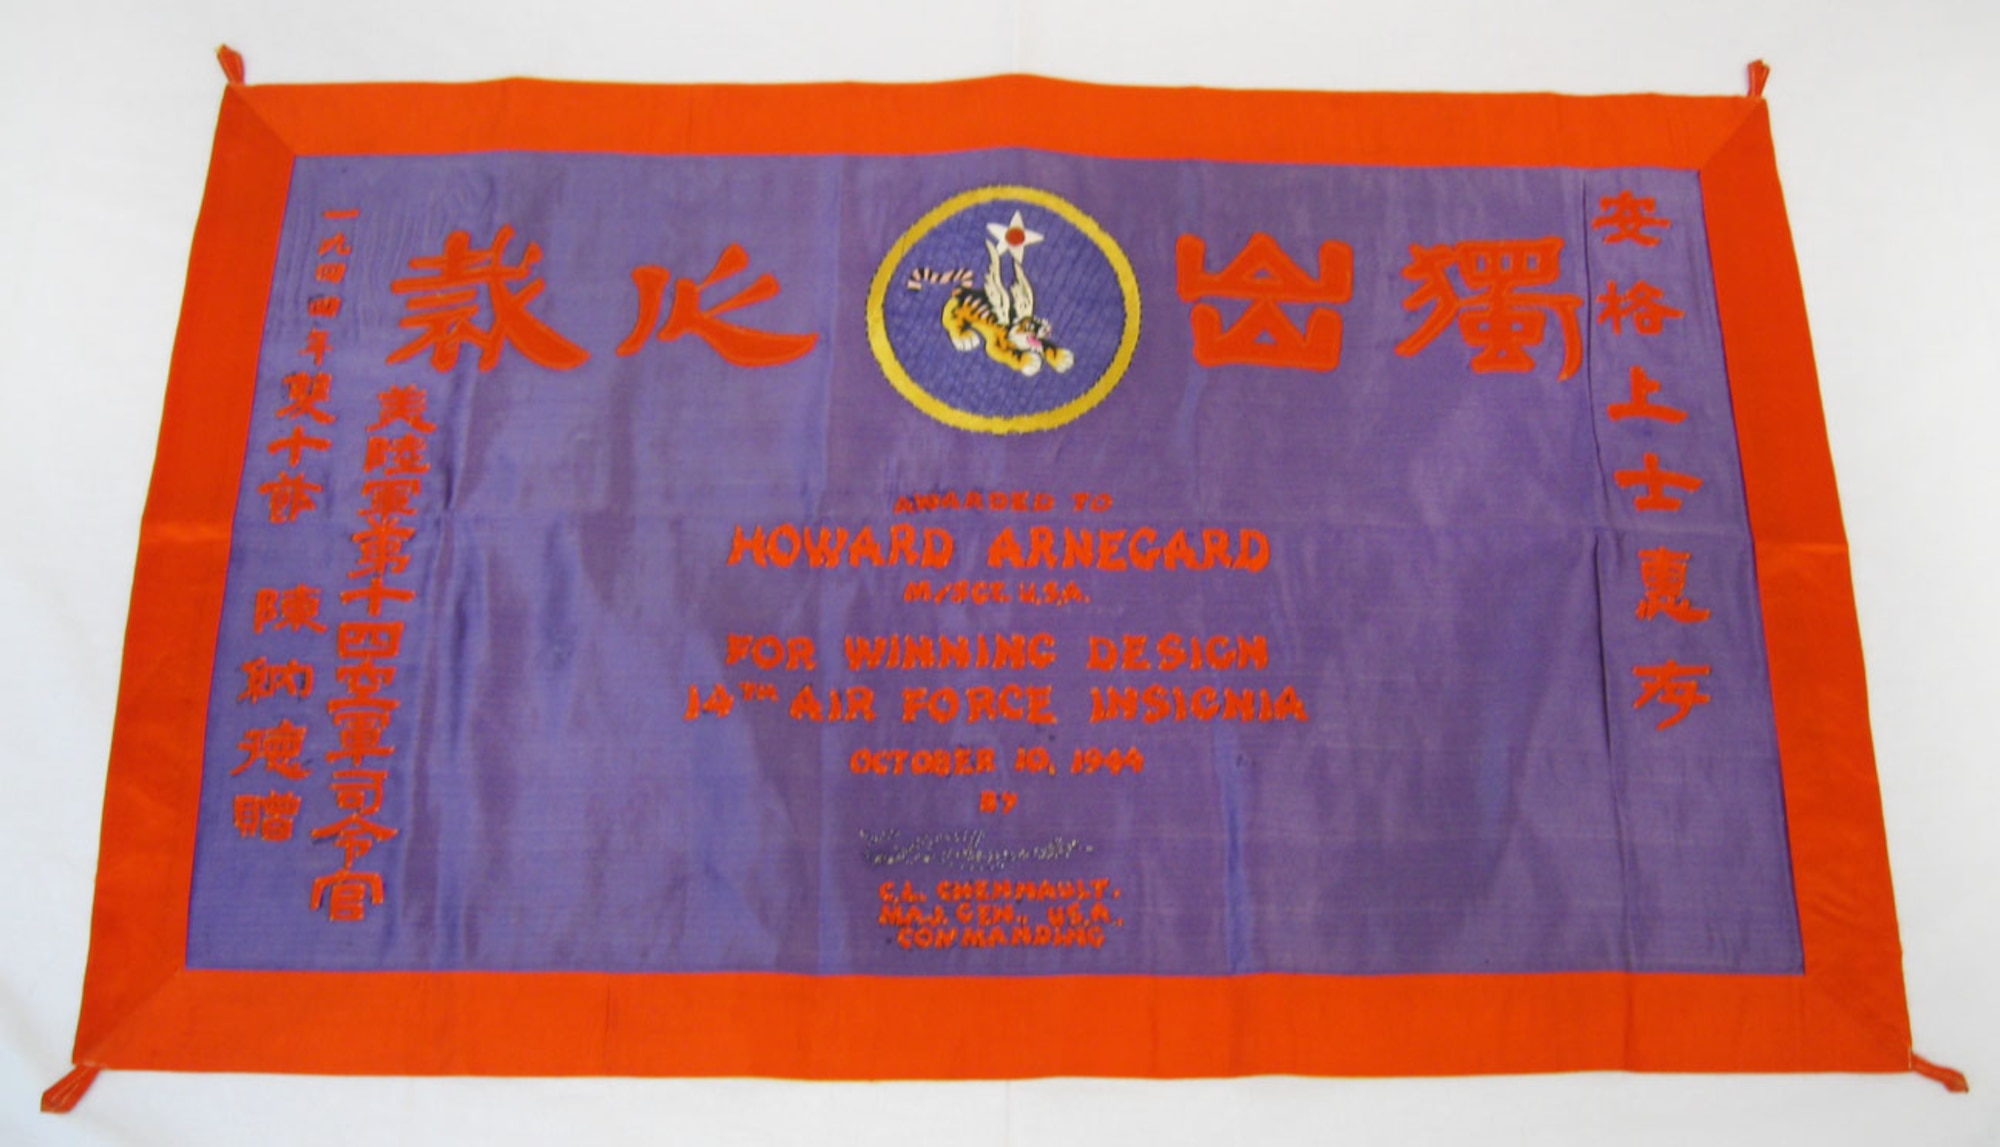 This banner was awarded to the donor's father, Howard Arnegard, for the winning design in Maj. Gen. Claire Chennault's contest for the 14th Air Force insignia. It was made in 1944 in China. The Chinese lettering translates to the English wording on the banner. (U.S. Air Force photo)